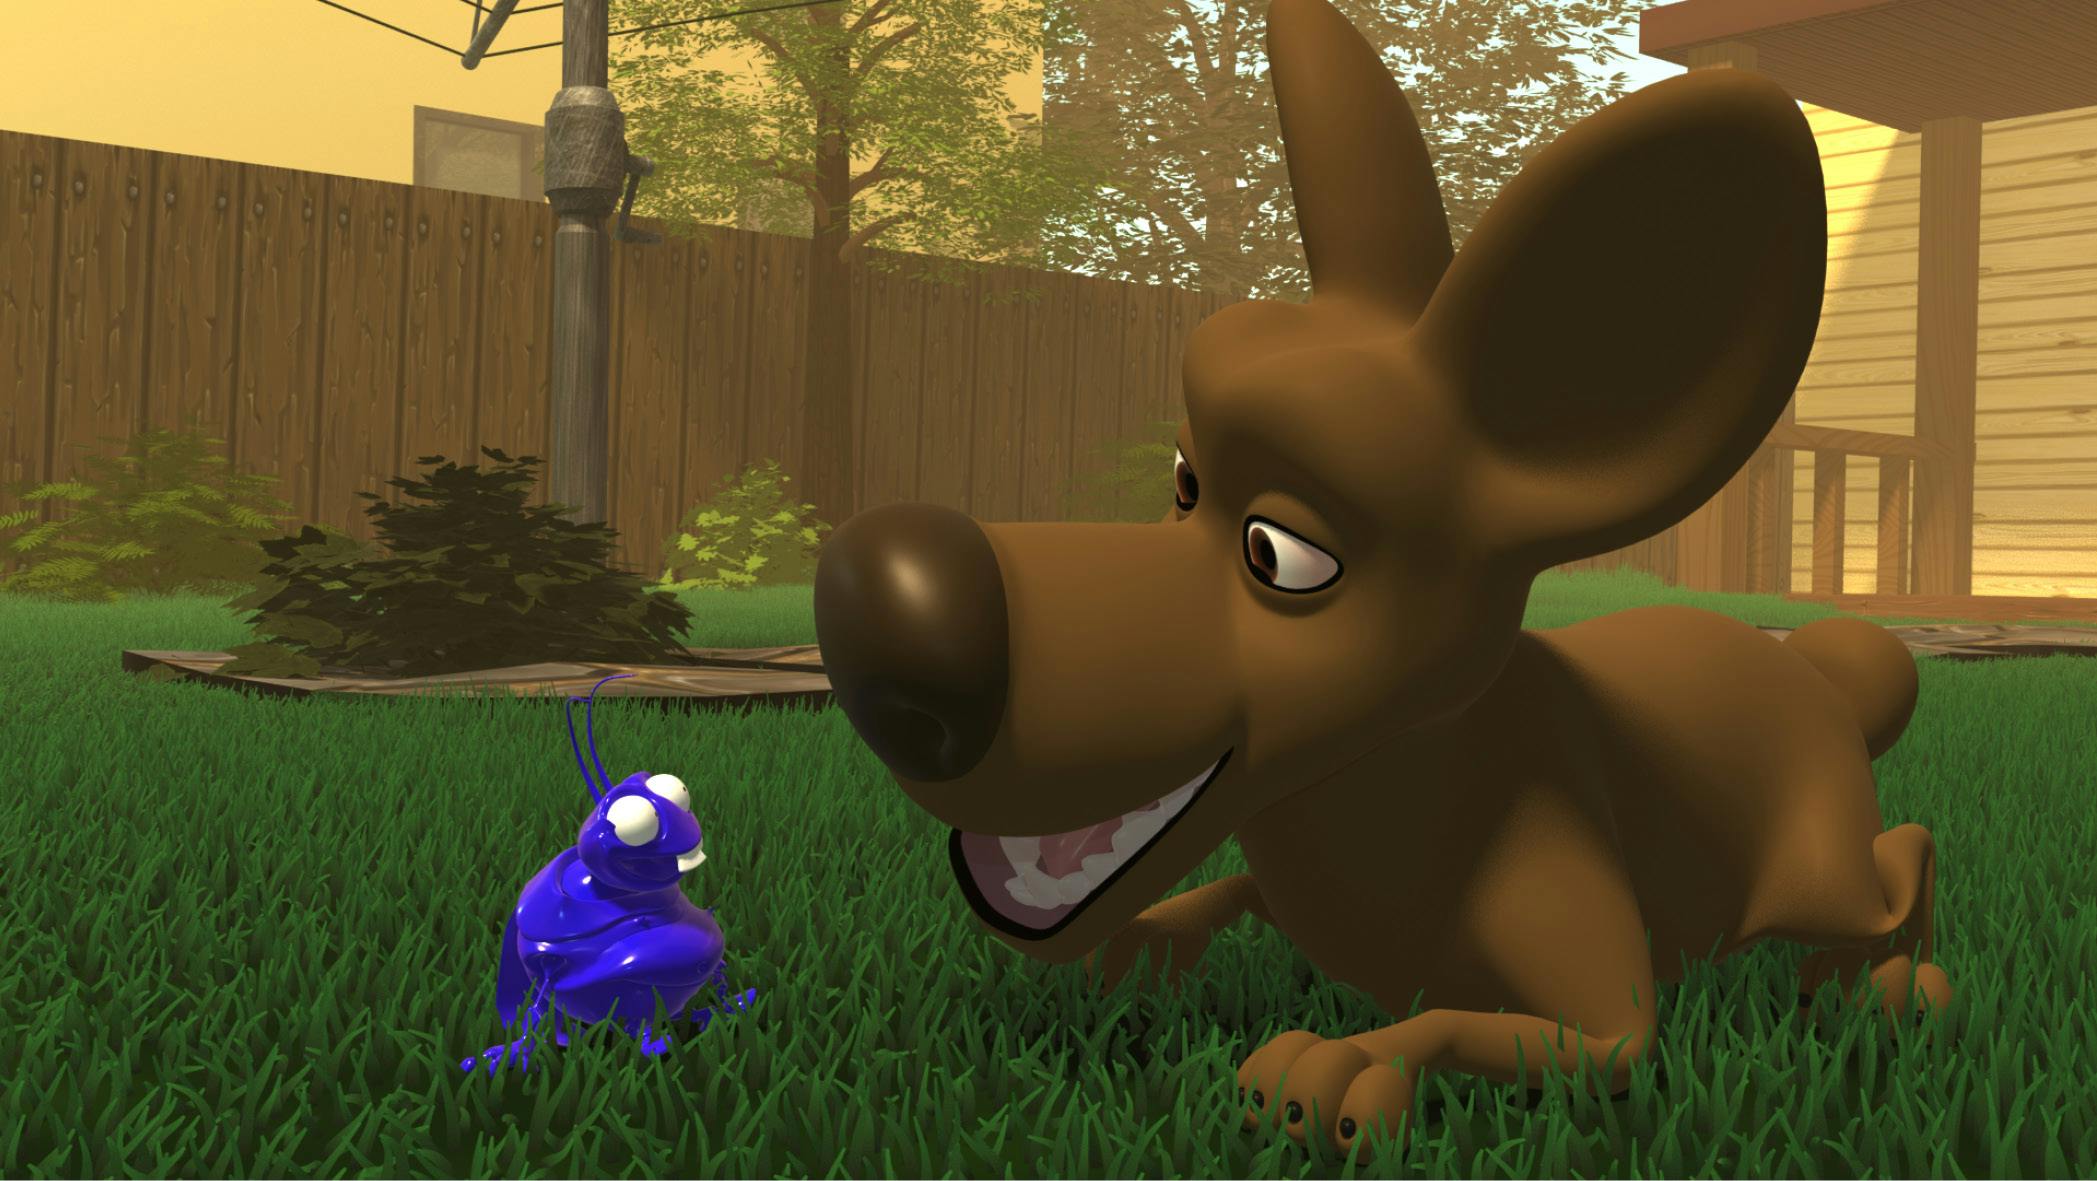 3D illustrated blue bug and brown dog character in a garden